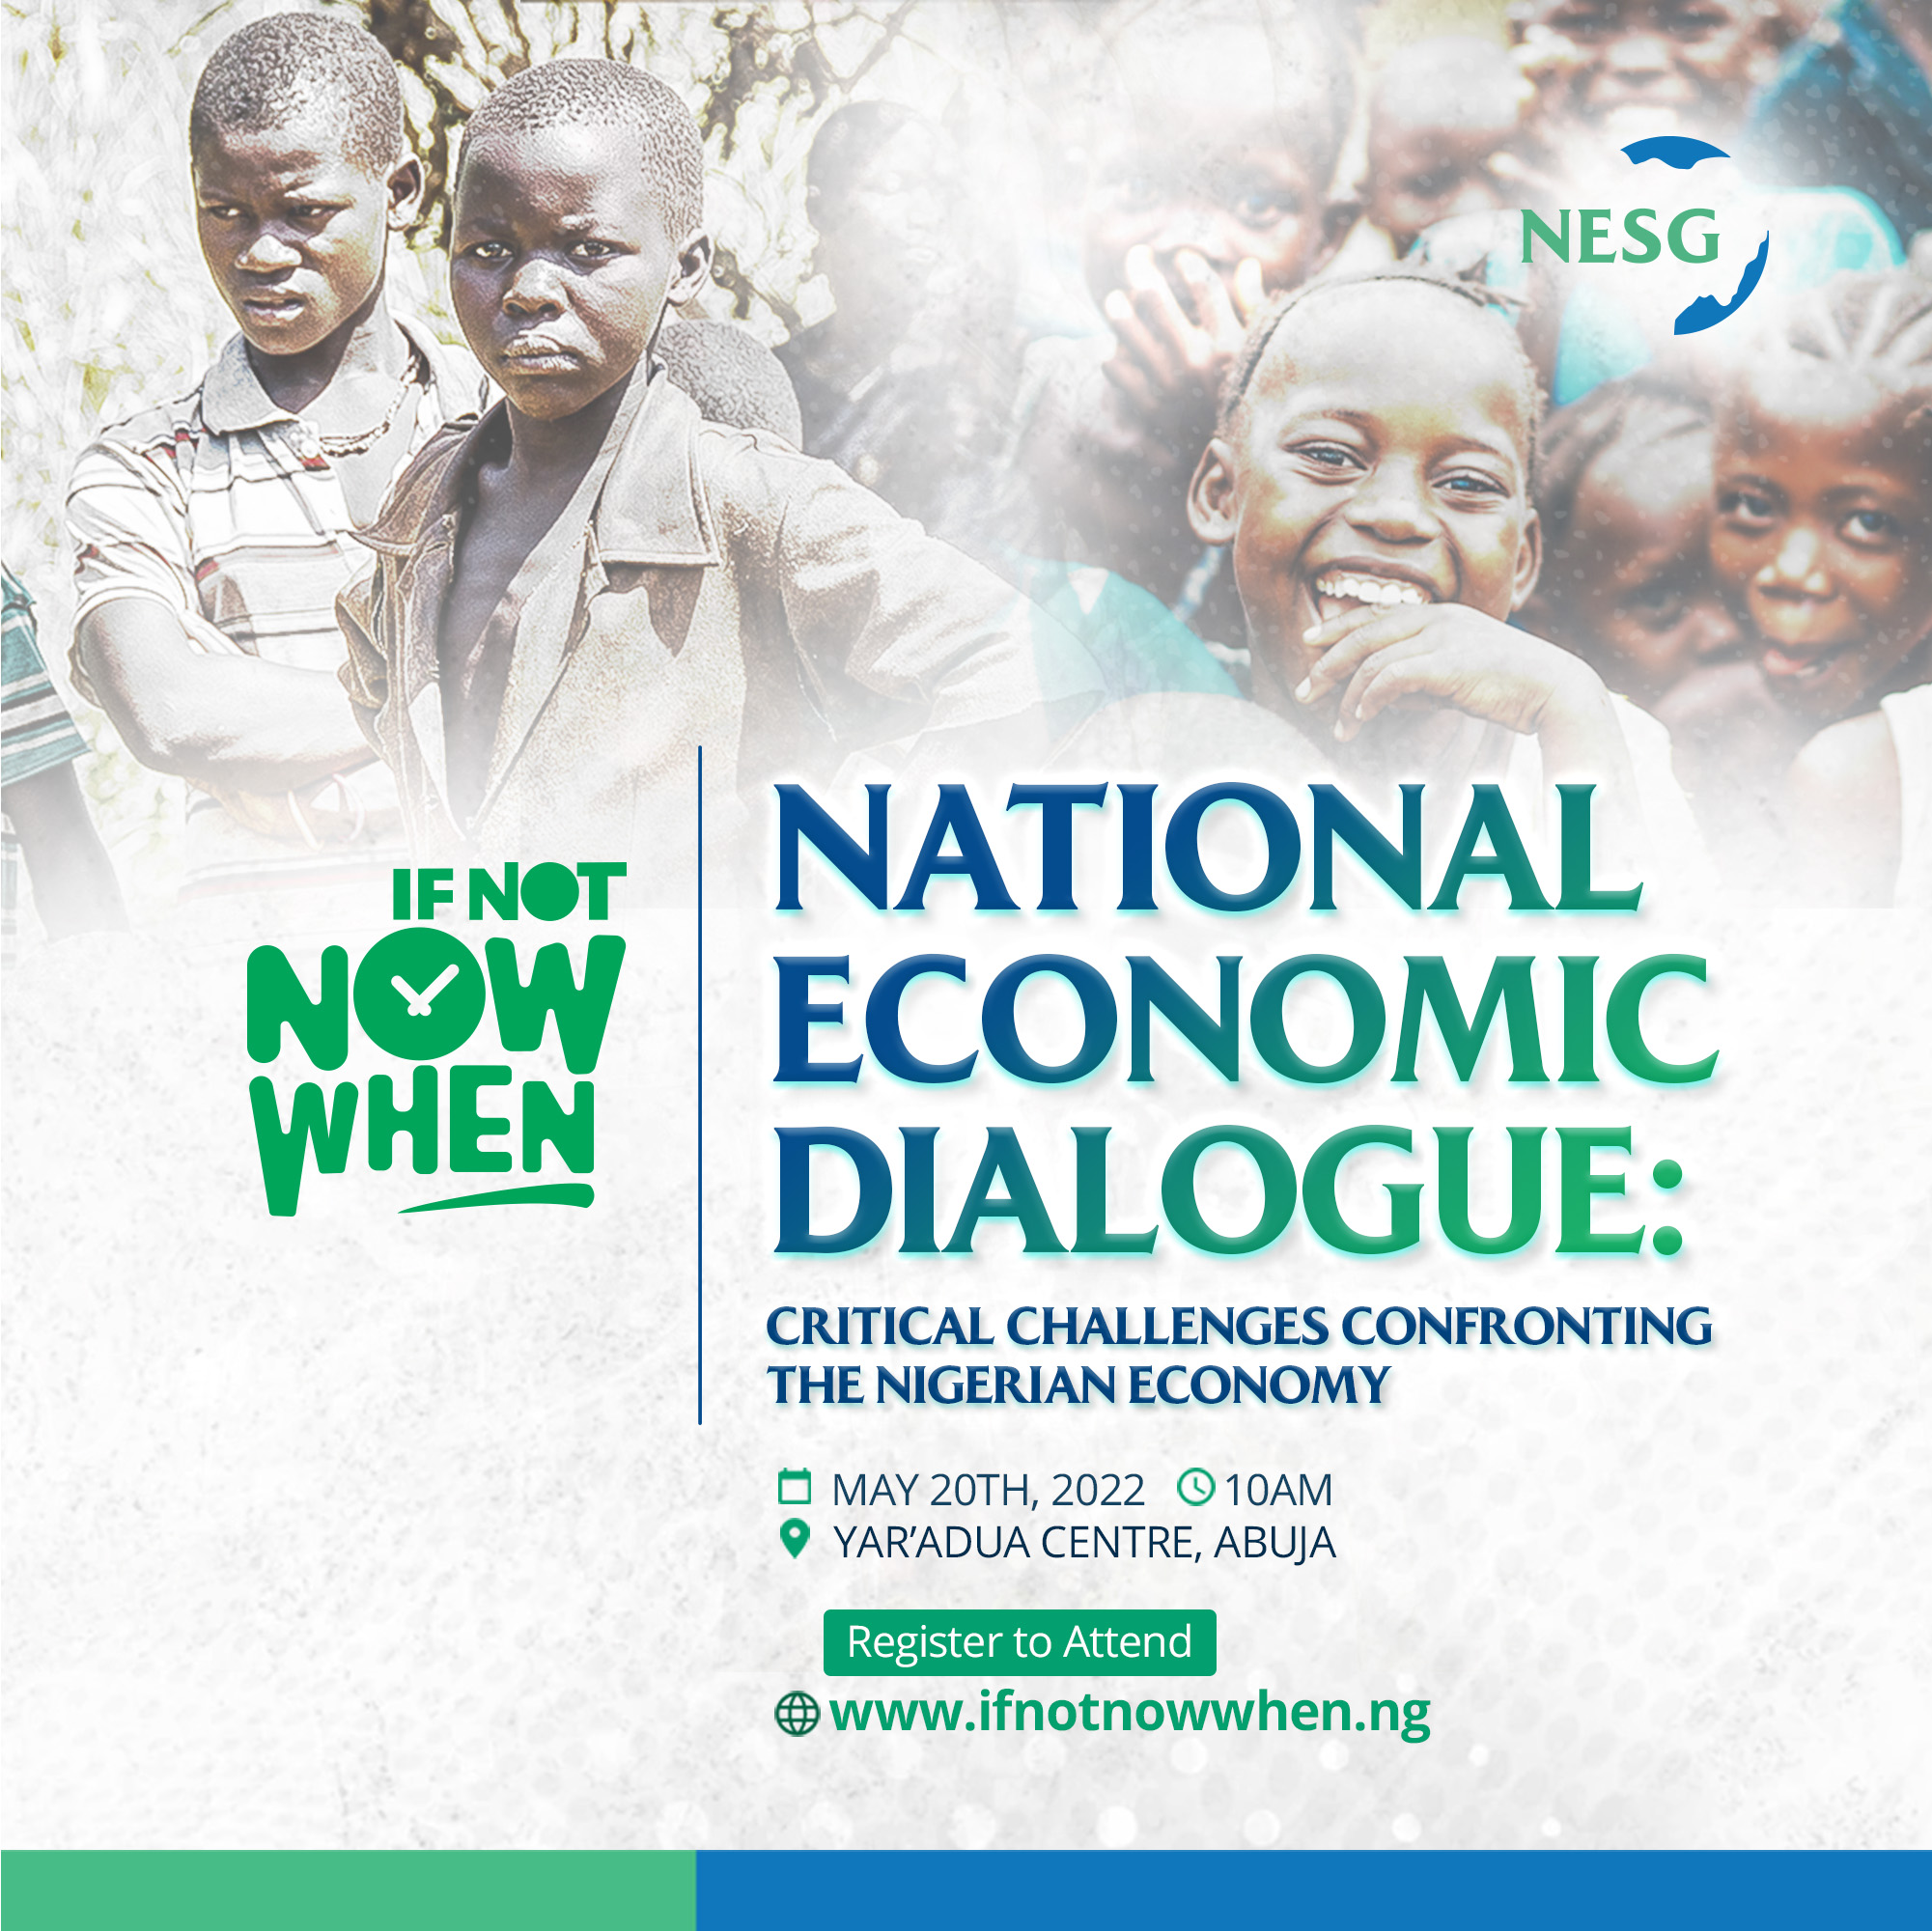 NESG to hold National Economic Dialogue to confront the Critical Challenges Confronting the Nigerian Economy